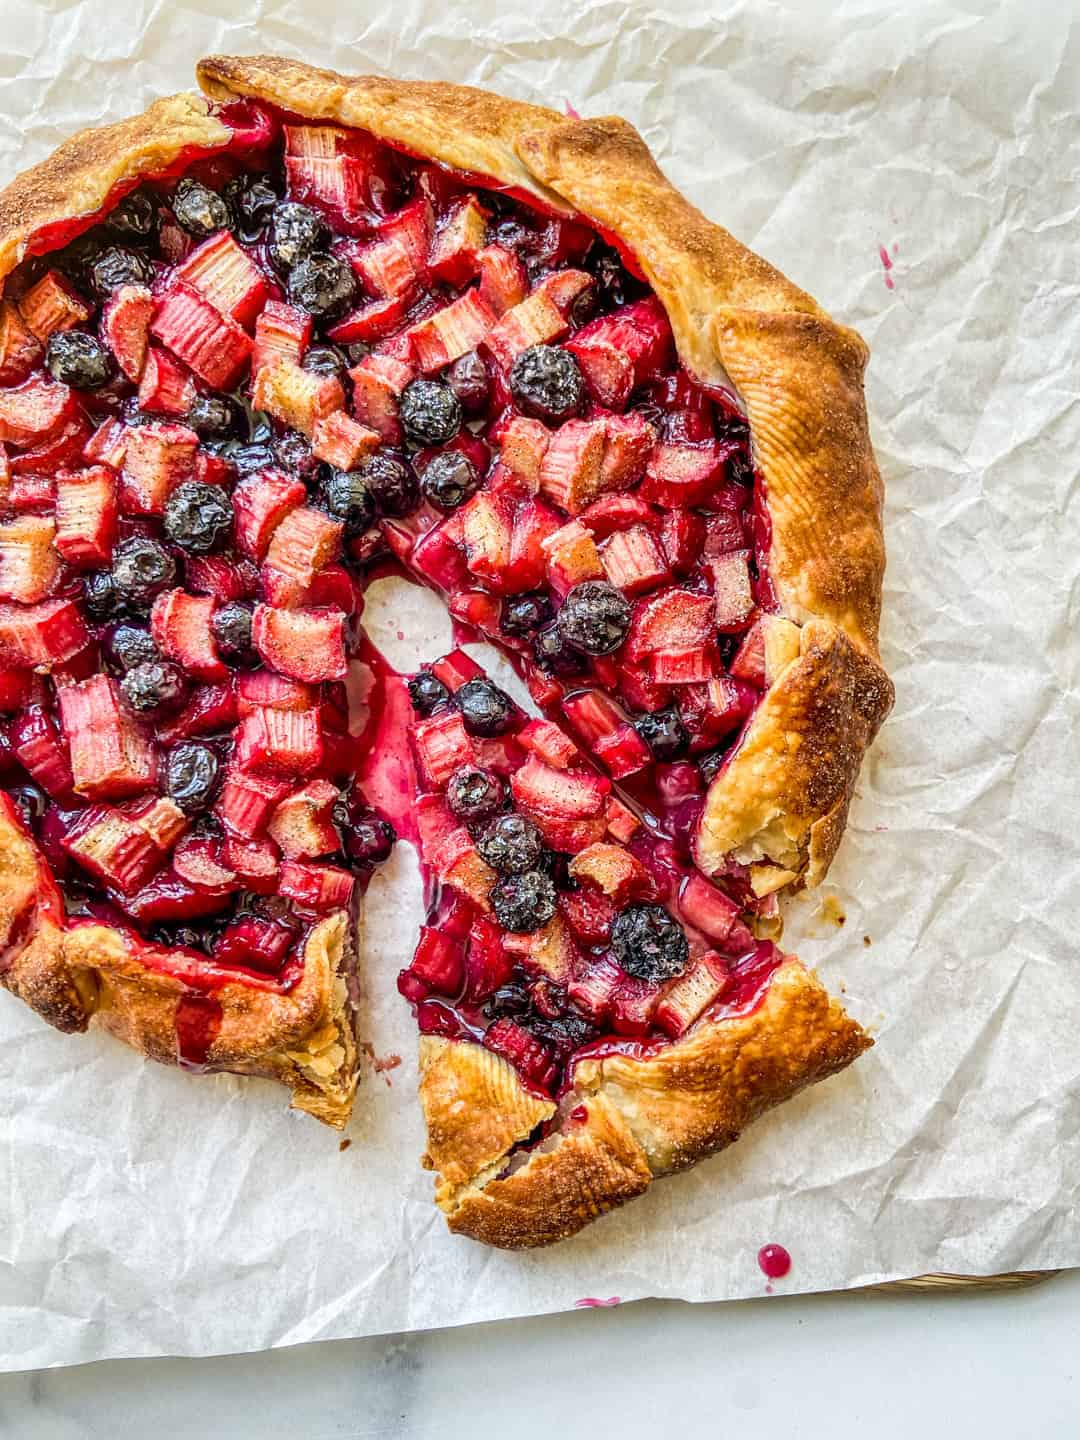 rhubarb blueberry galette on parchment paper.